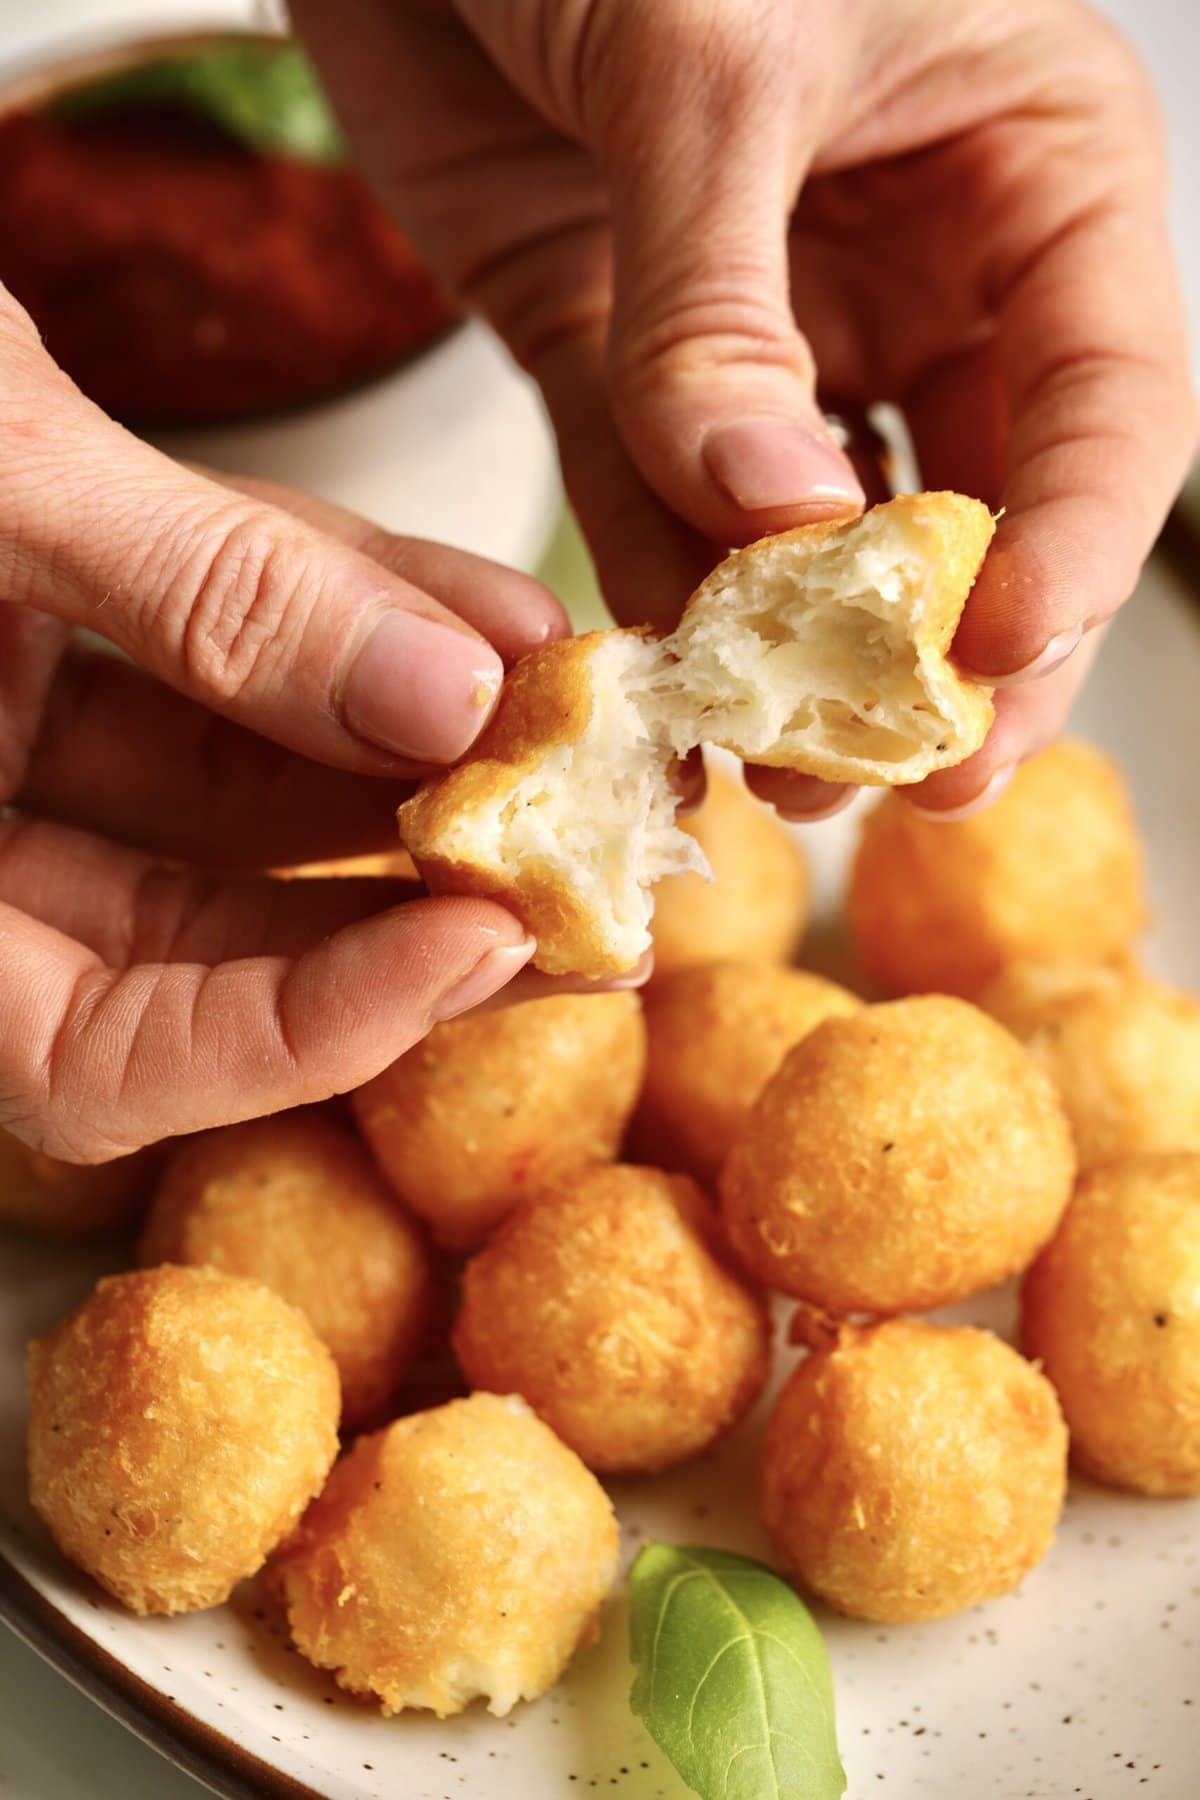 hands opening a fried cheese ball to show the gooey cheese interior.